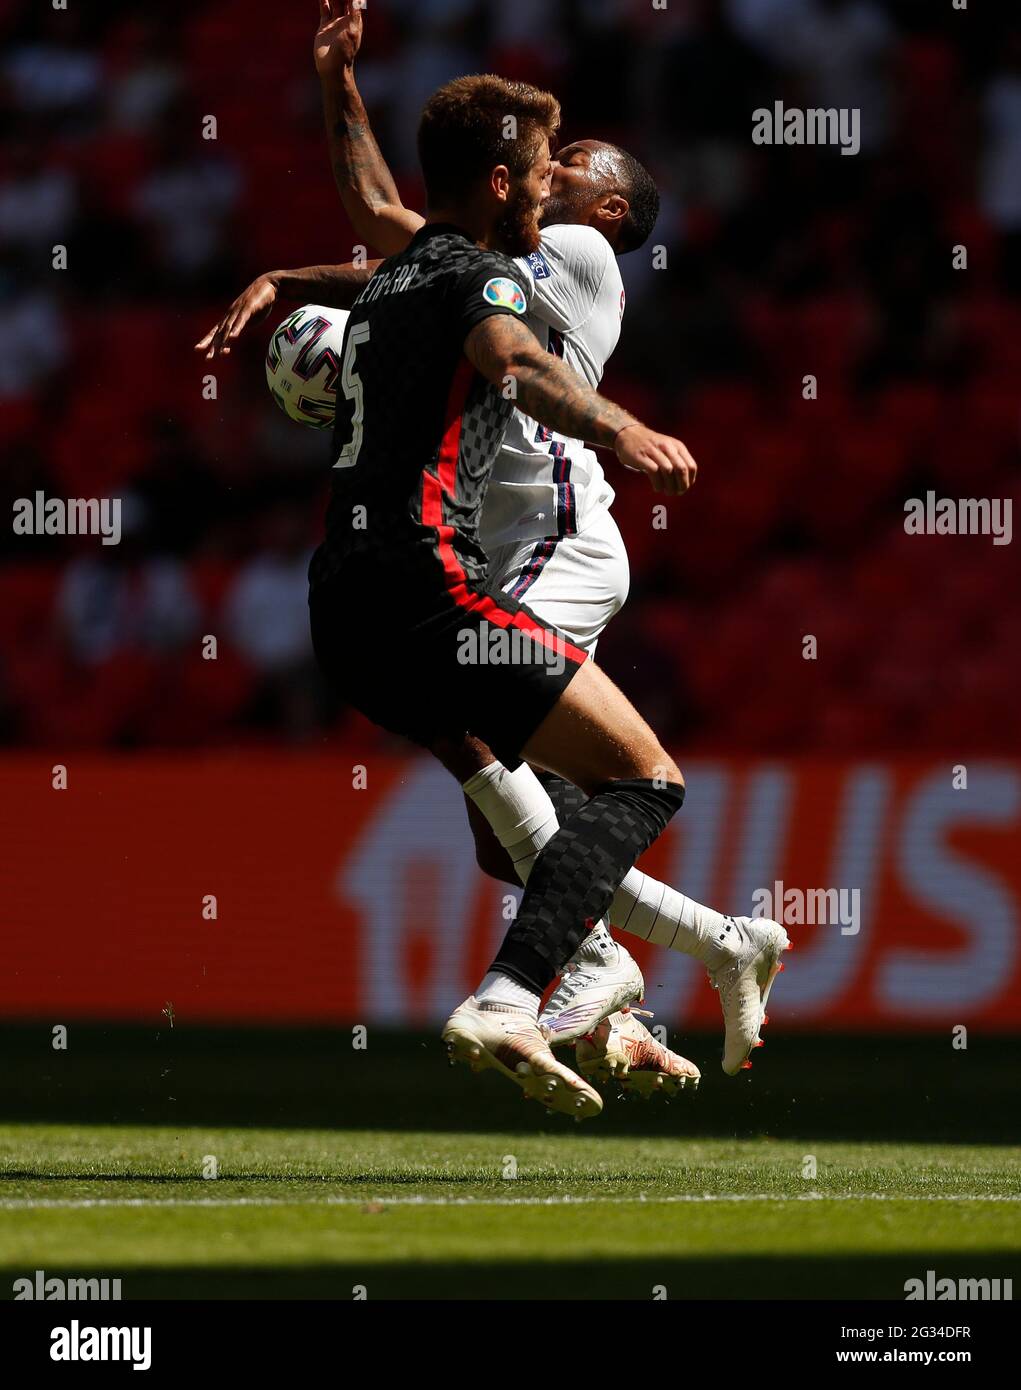 London, Britain. 13th June, 2021. England's Raheem Sterling (R) vies with Croatia's Duji Caleta-Car during the Group D match between England and Croatia at the UEFA Euro 2020 Championship in London, Britain, on June 13, 2021. Credit: Han Yan/Xinhua/Alamy Live News Stock Photo